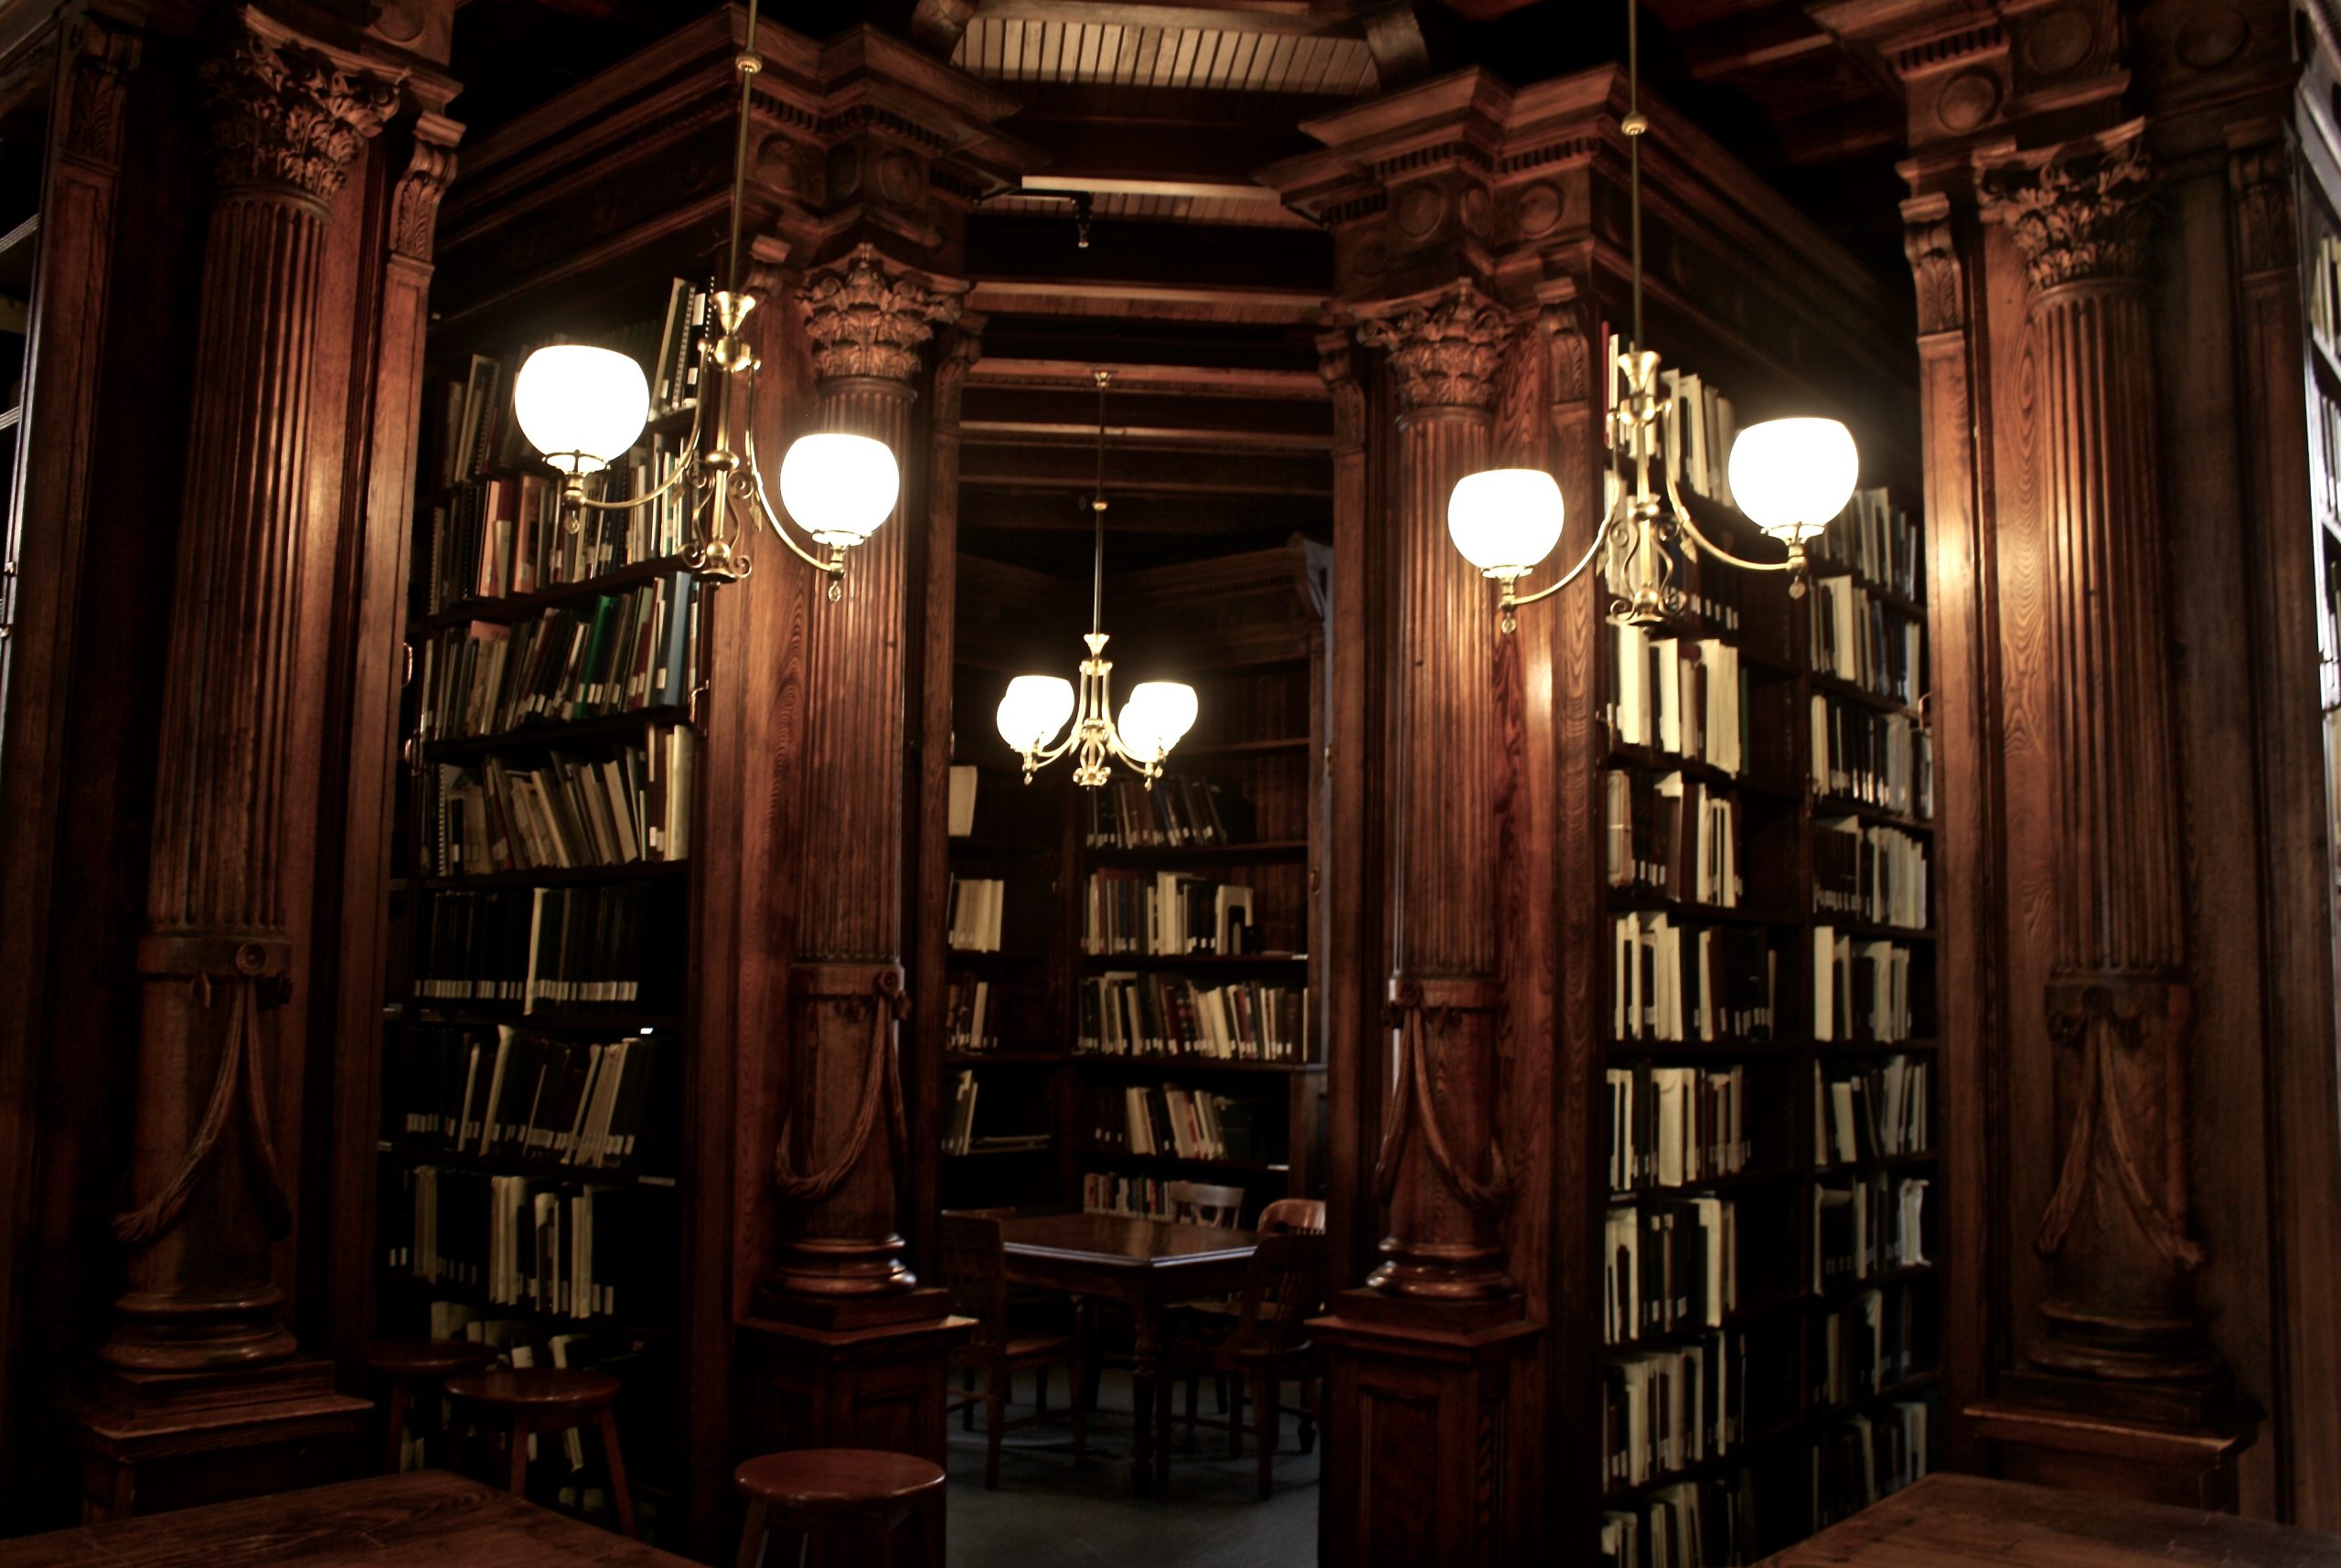 A corner of the Othmer library